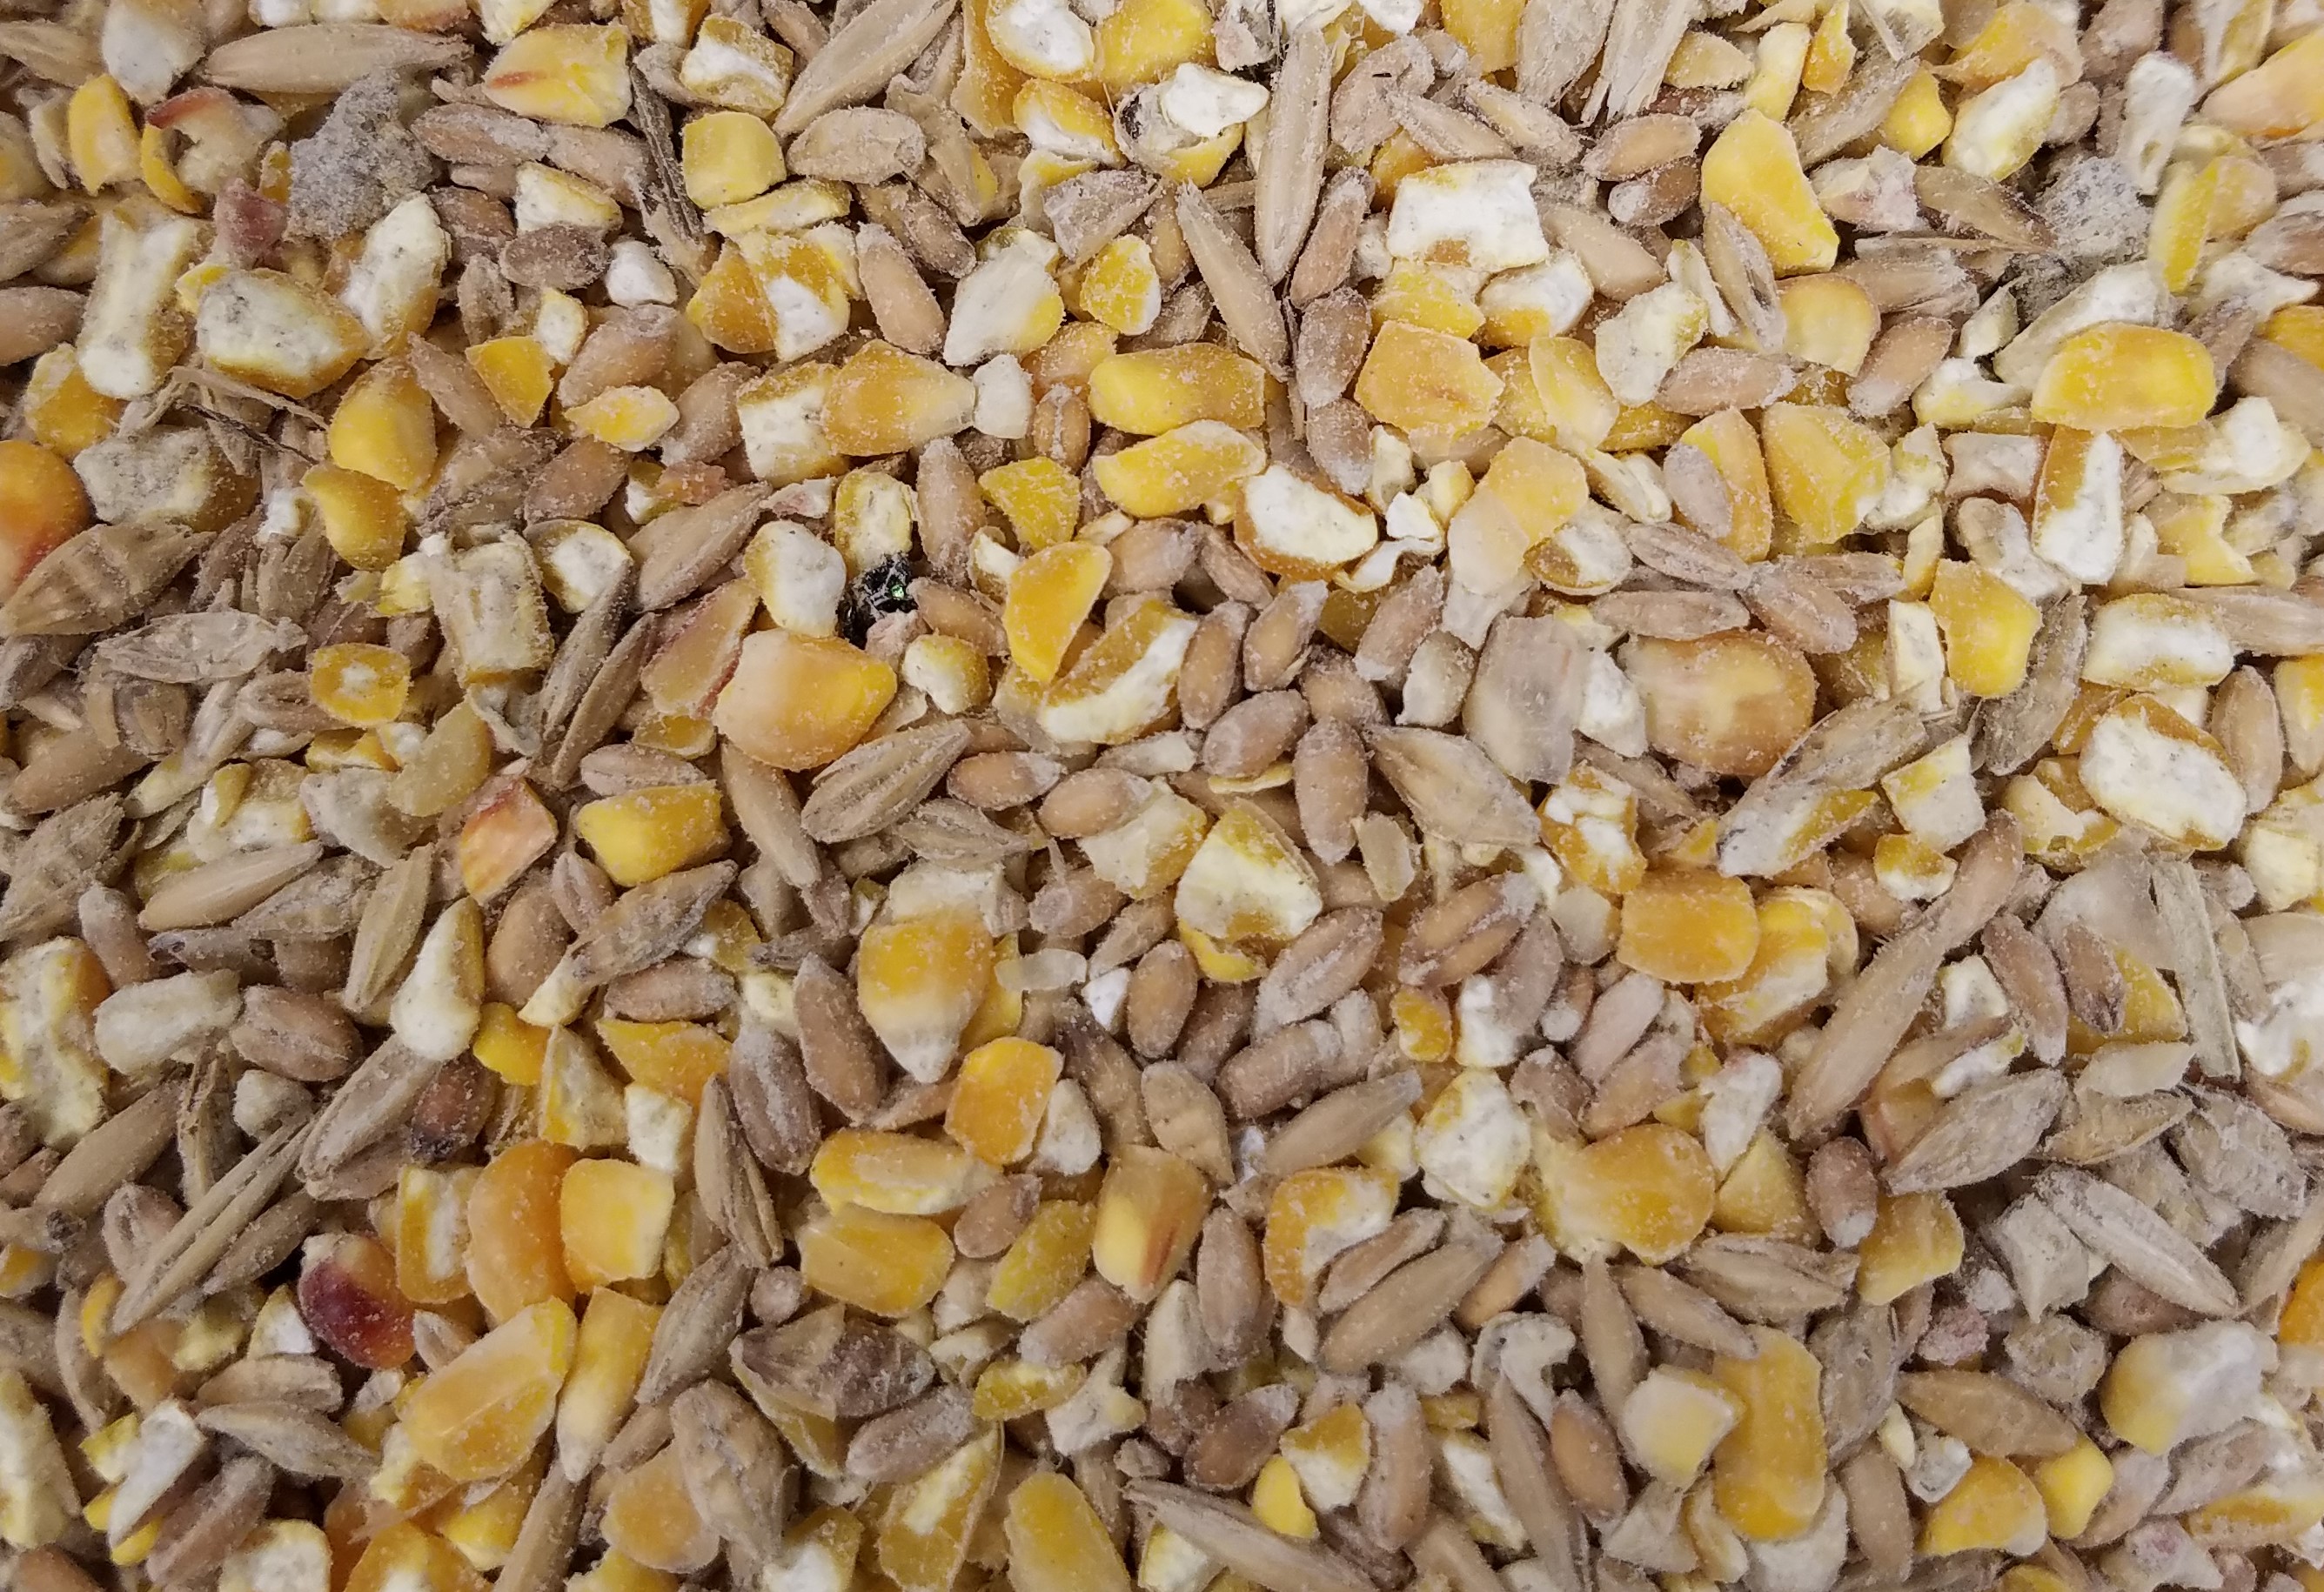 Poultry Feed-Maryland - Farmers Cooperative Association, Inc Cracked Corn Vs Whole Corn For Chickens